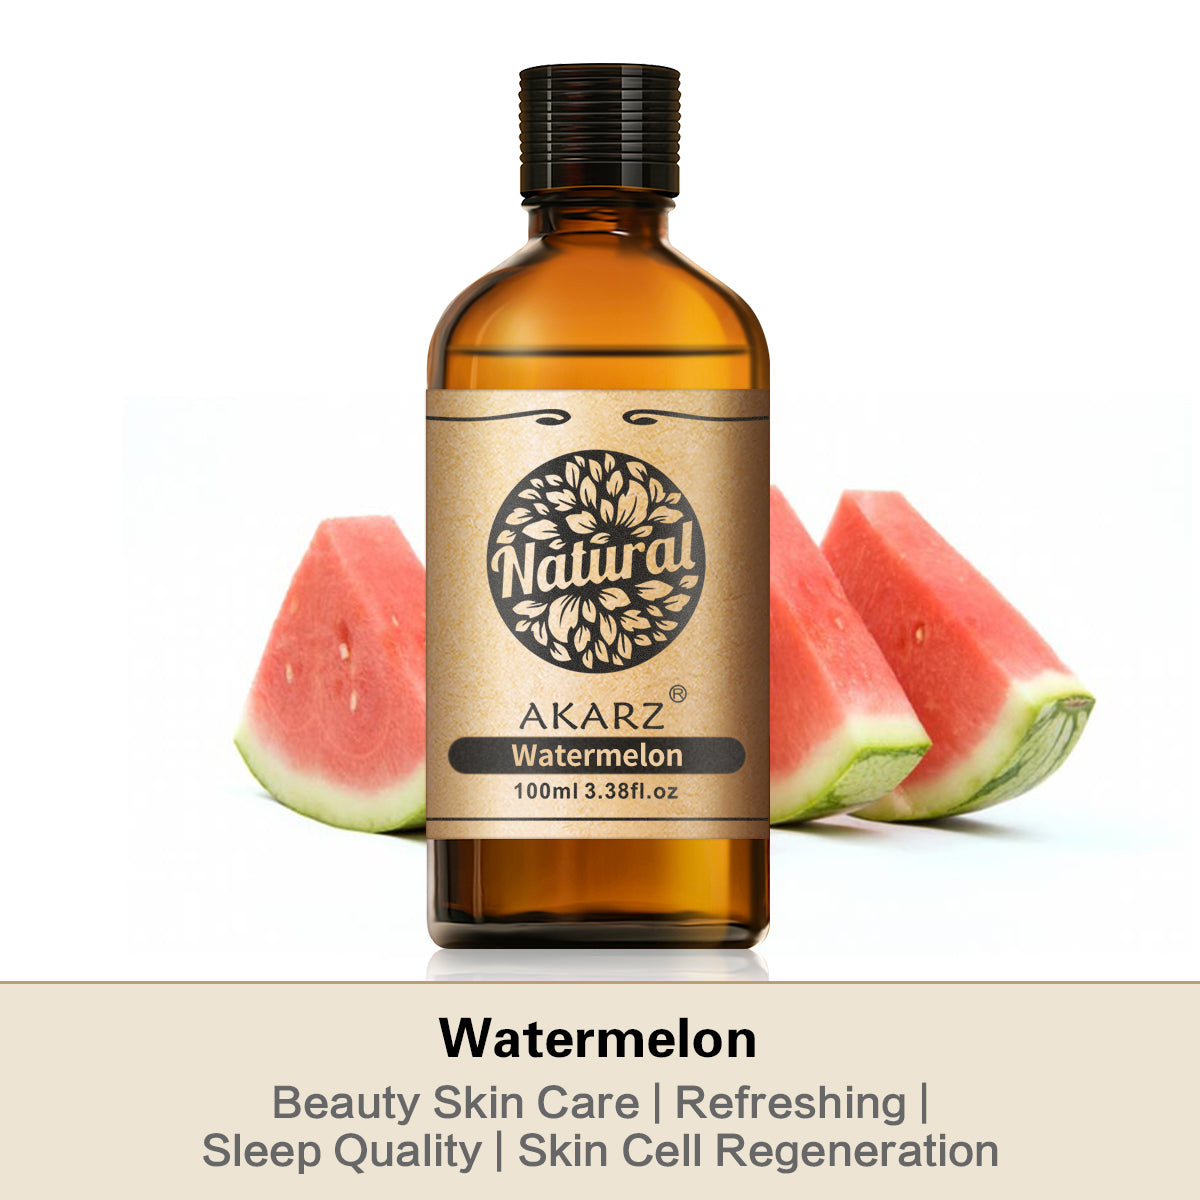 AKARZ natural Watermelon essential oil aromatic for aromatherapy diffusers  body skin care aroma Watermelon oil